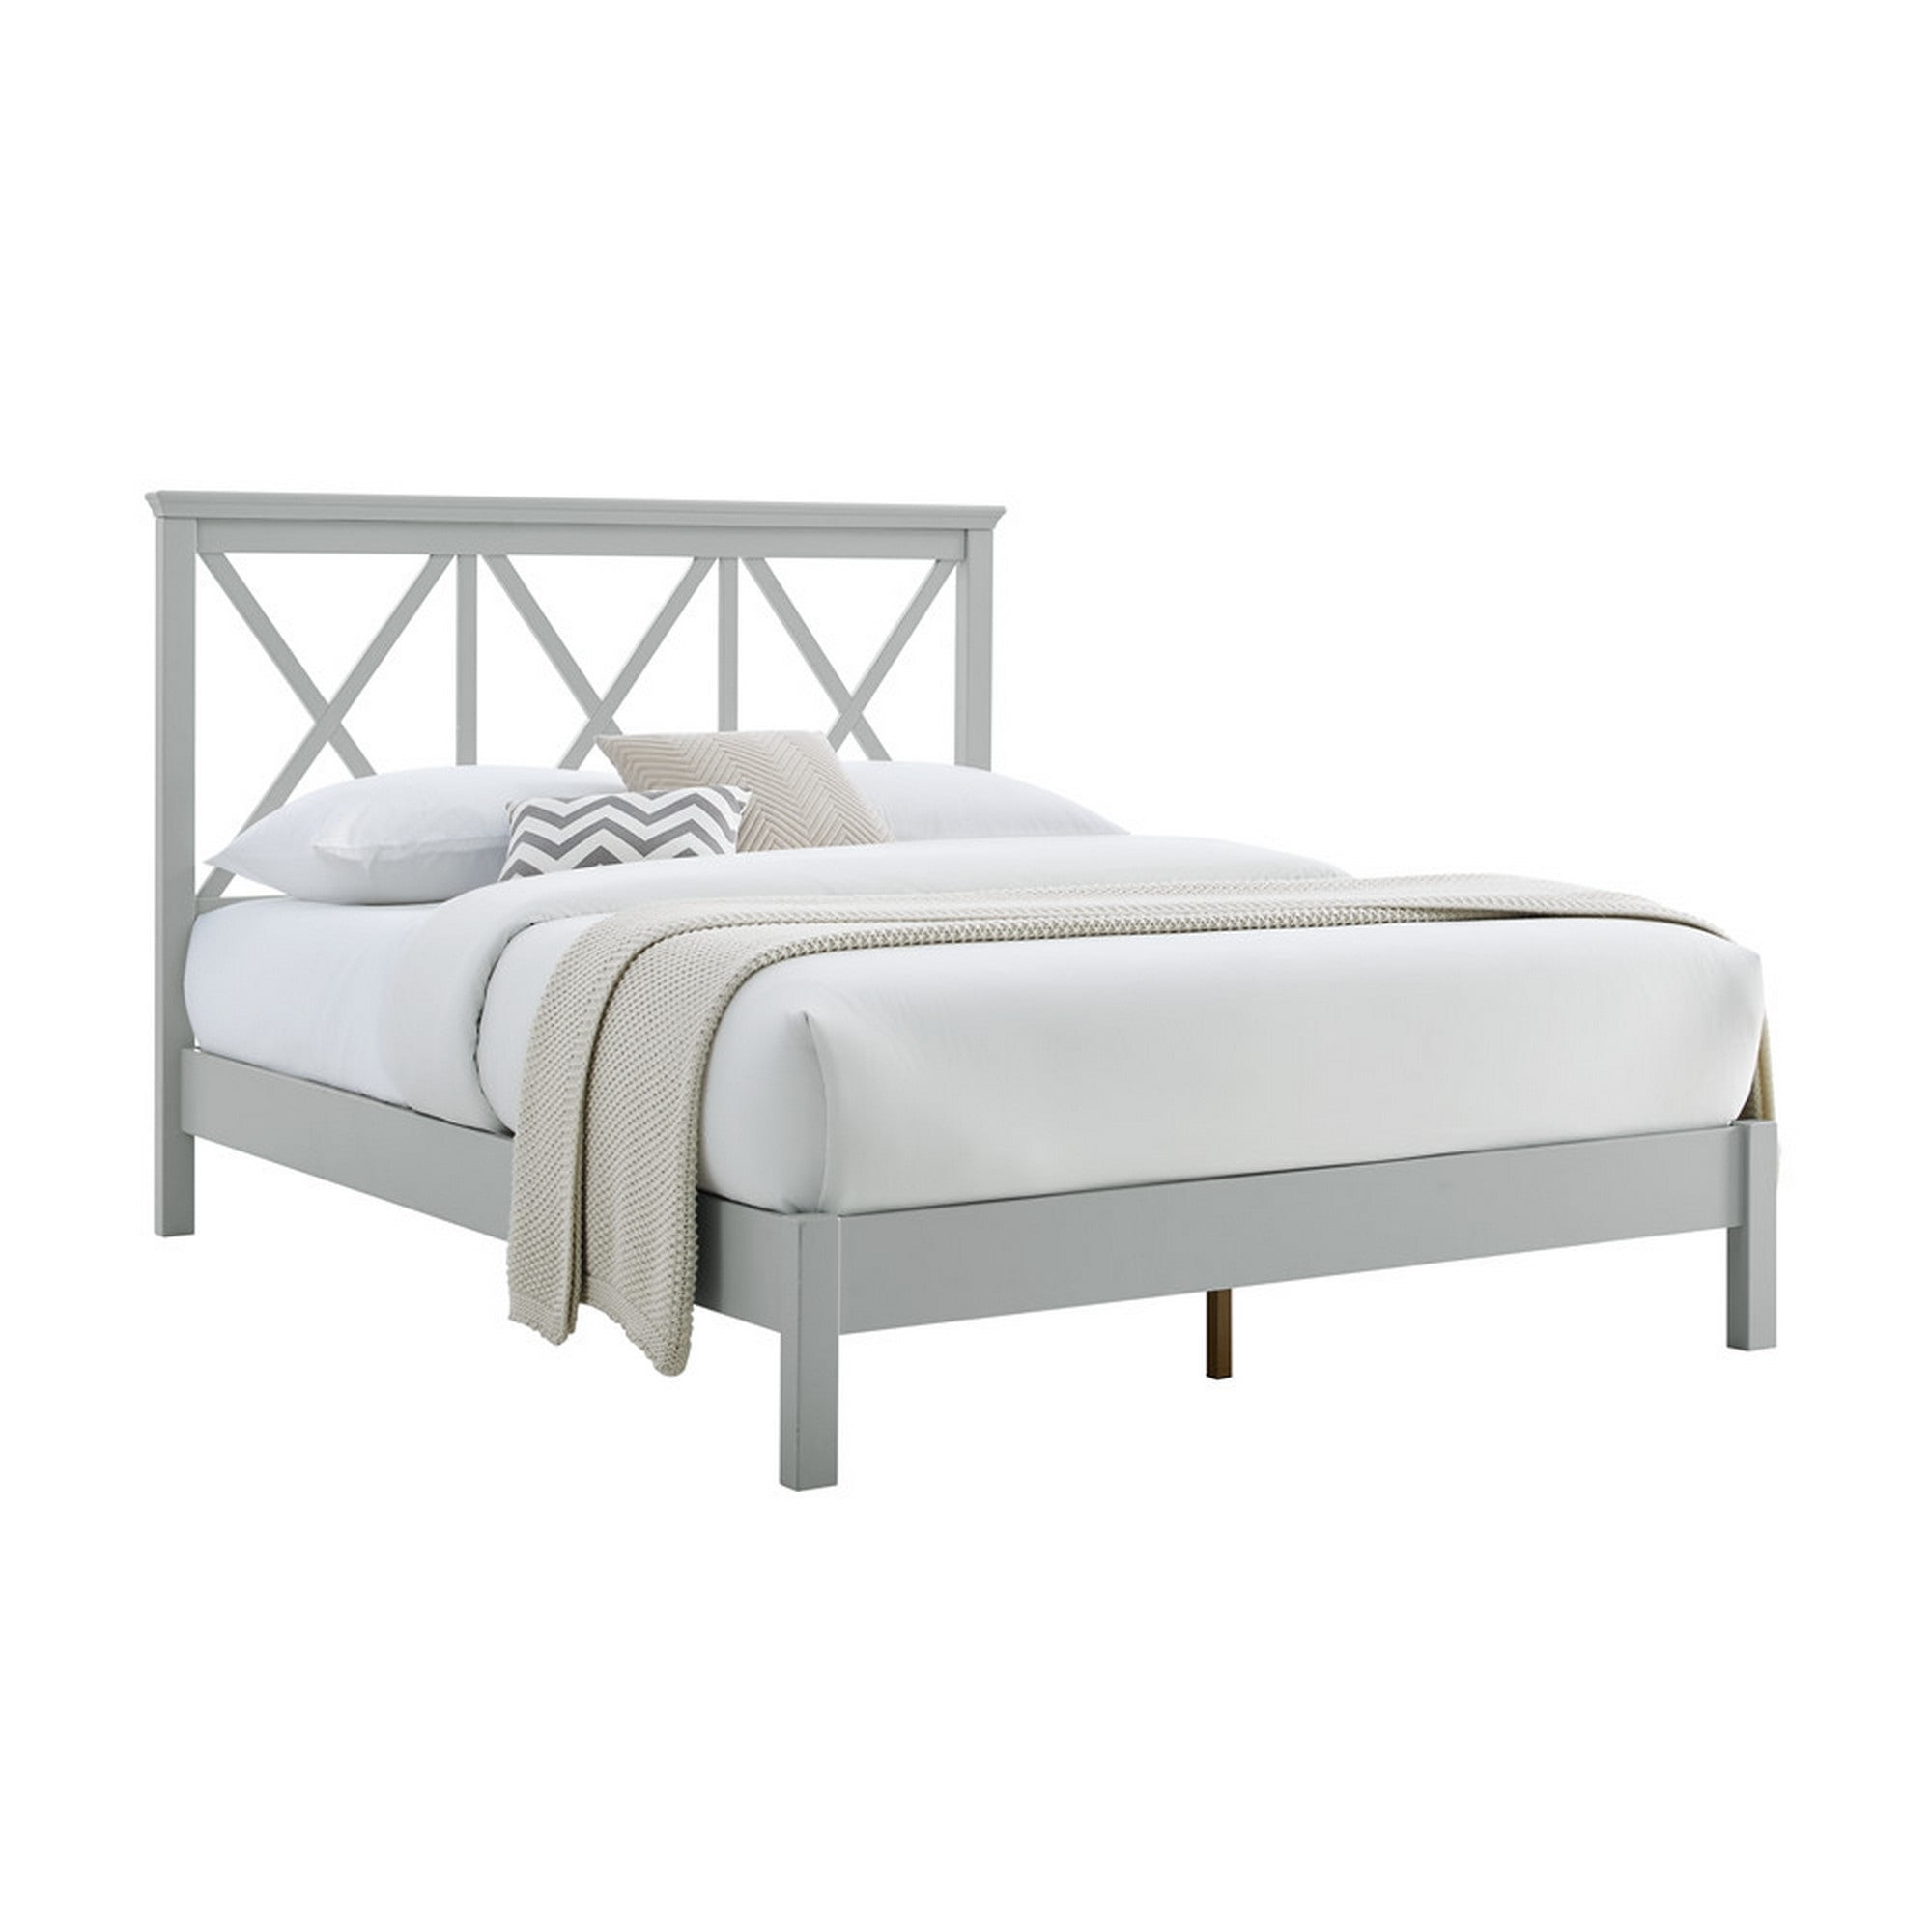 Farmhouse Style King Size Bed With, Triple King Size Bed